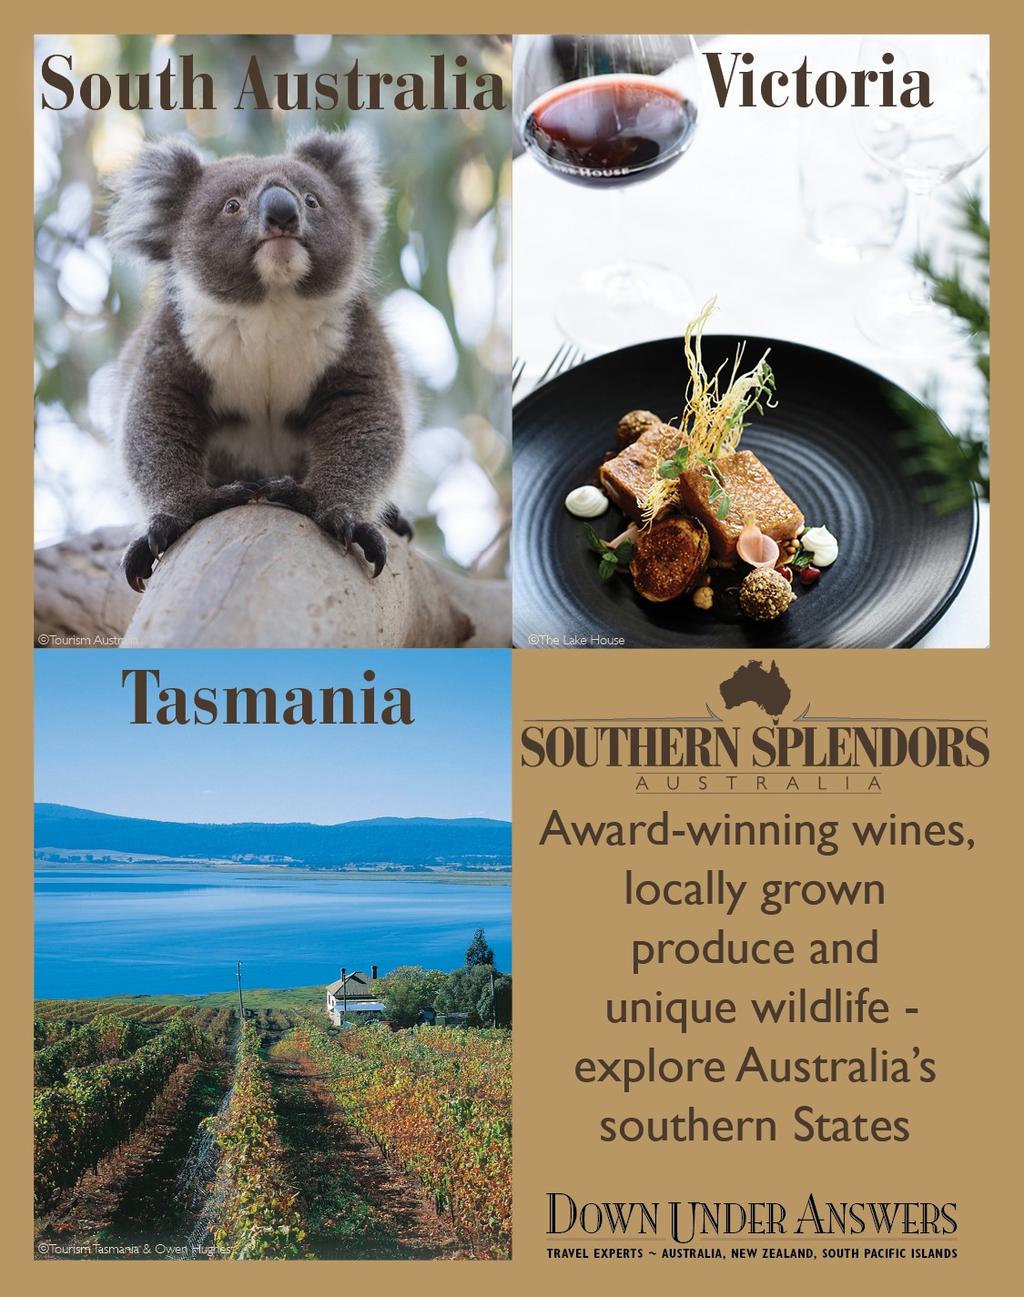 More to come later, but in the meantime, mark your Calendar for Oct 13! Australia s Southern Splendors Love good wine? Ready to meet a koala face to face? Enjoy award winning cuisine?